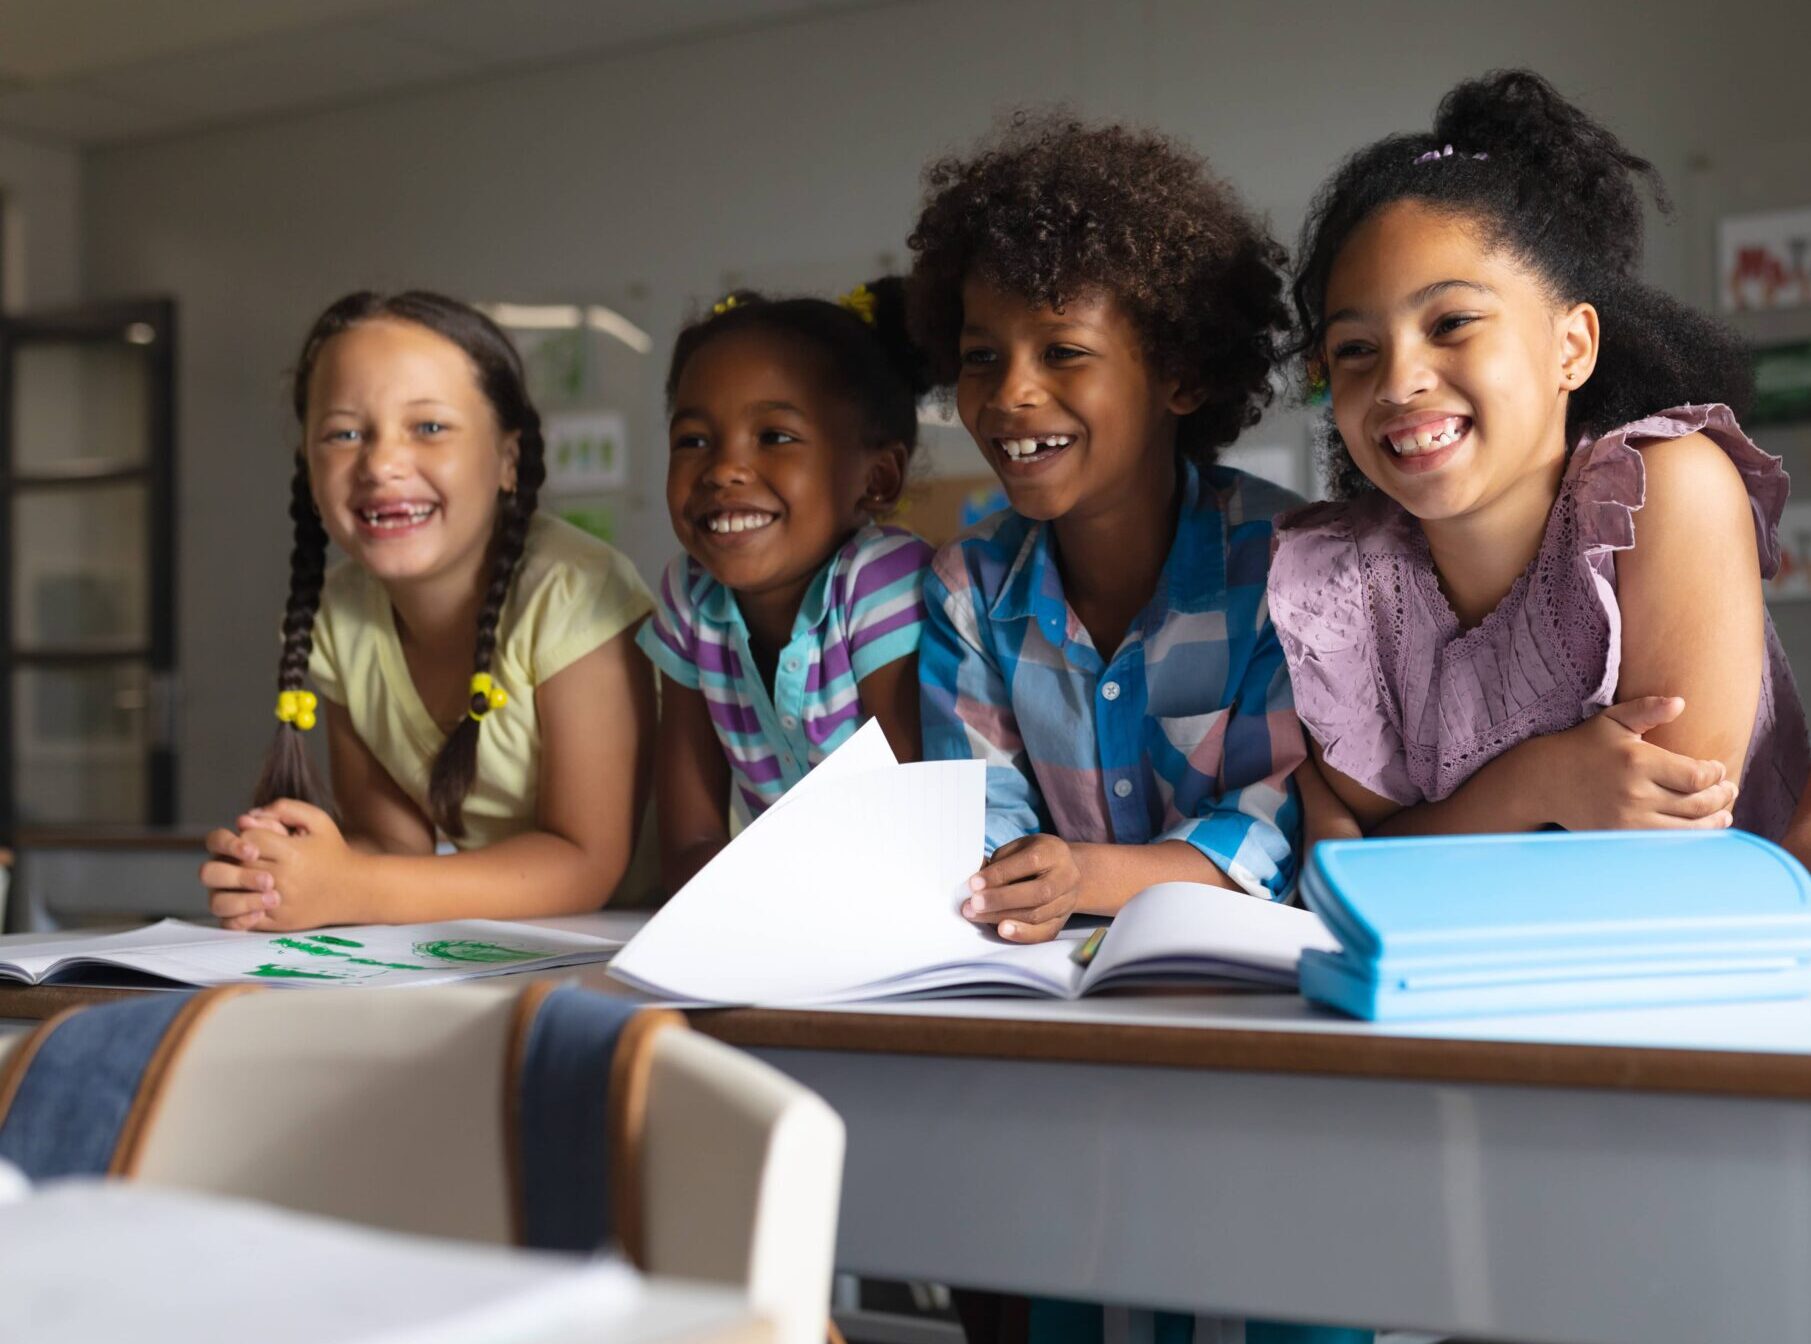 Four students leaning on desks with papers. they are laughing and smiling.